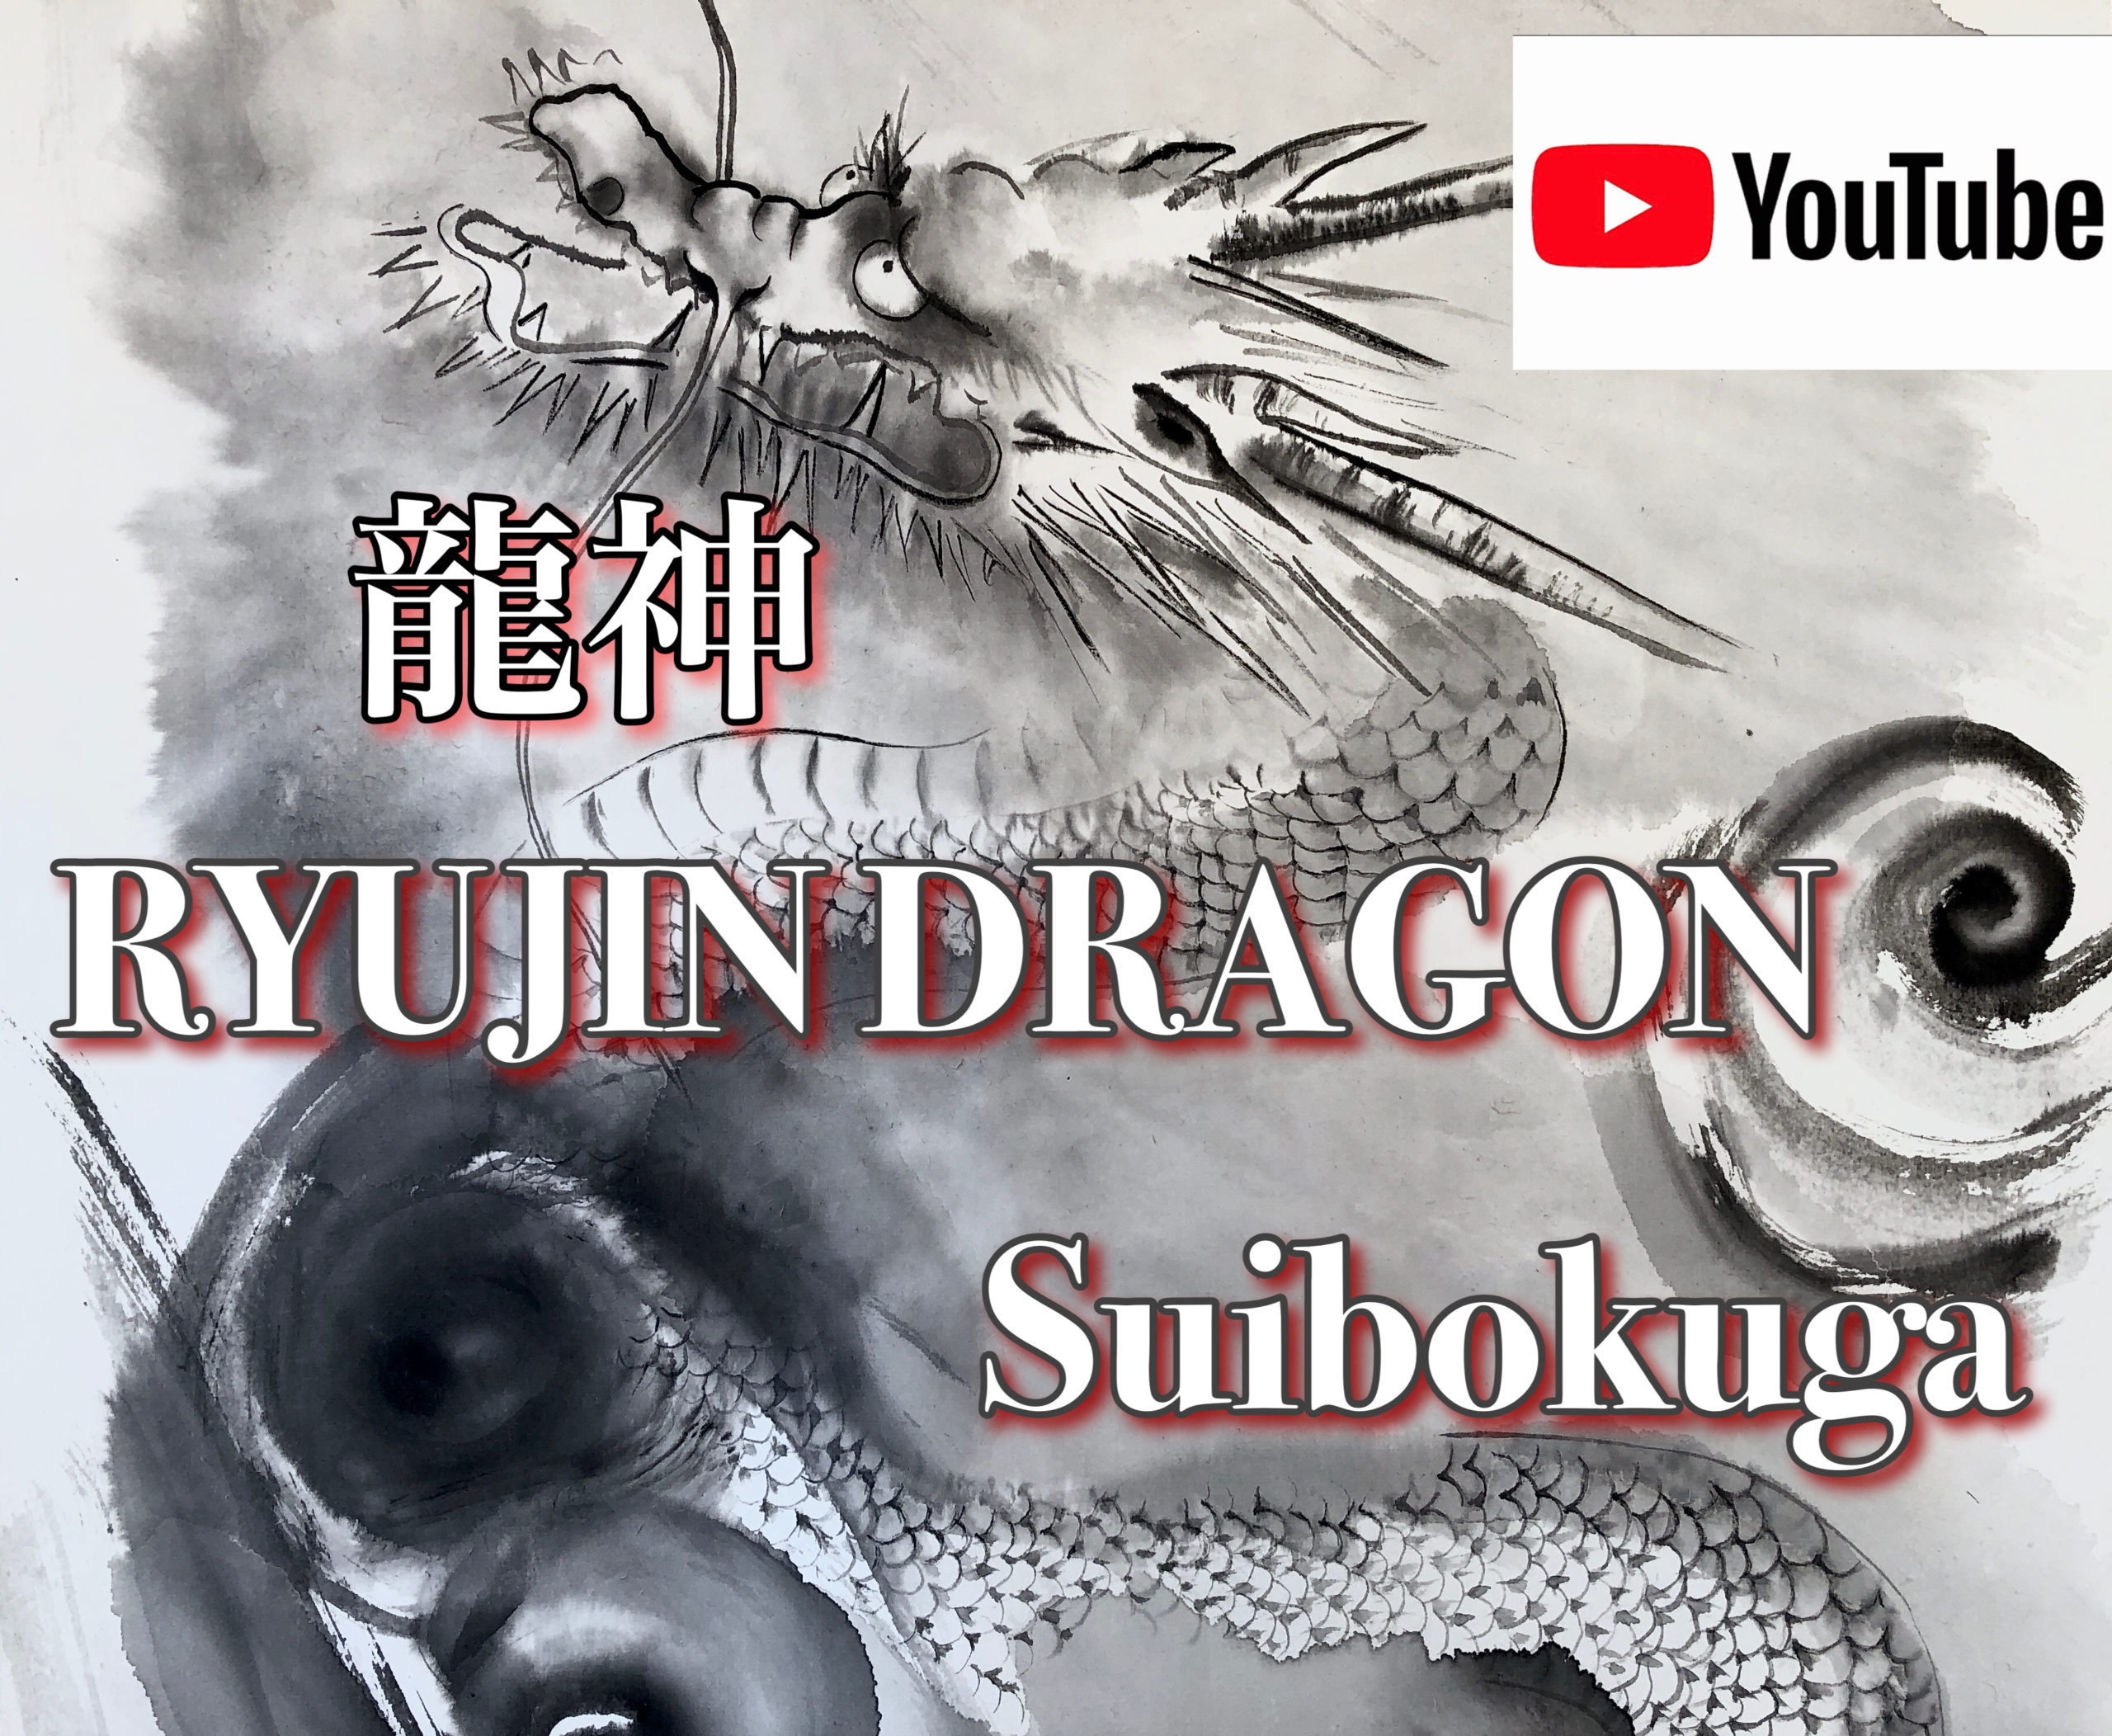 How to paint RYUJIN（龍神）on YouTube